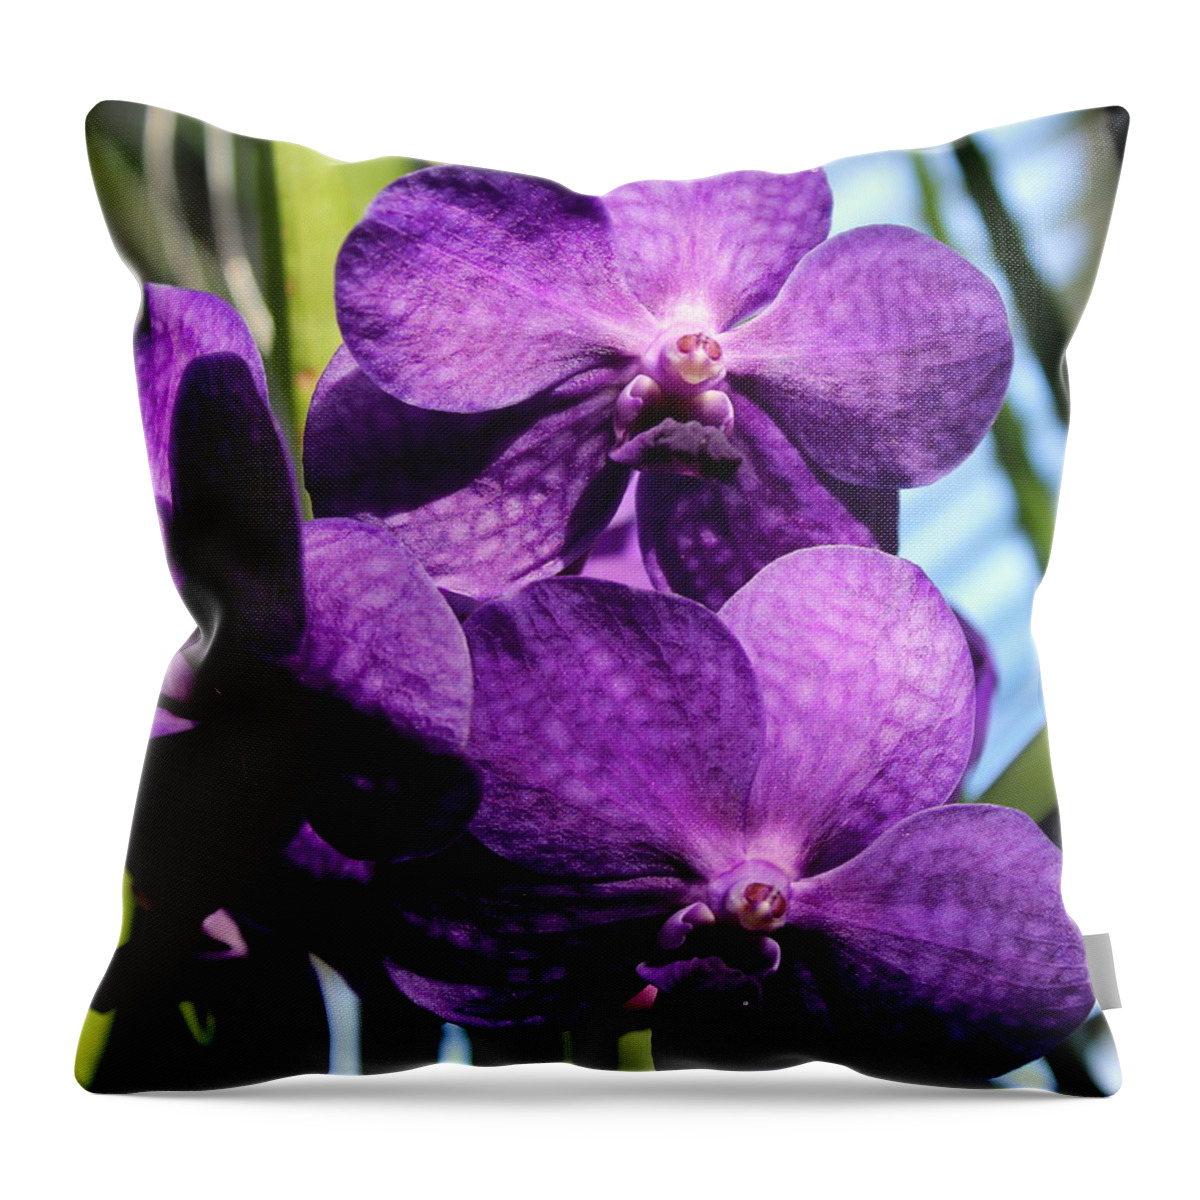 Flower Throw Pillow featuring the photograph Flower 3 by John Olson